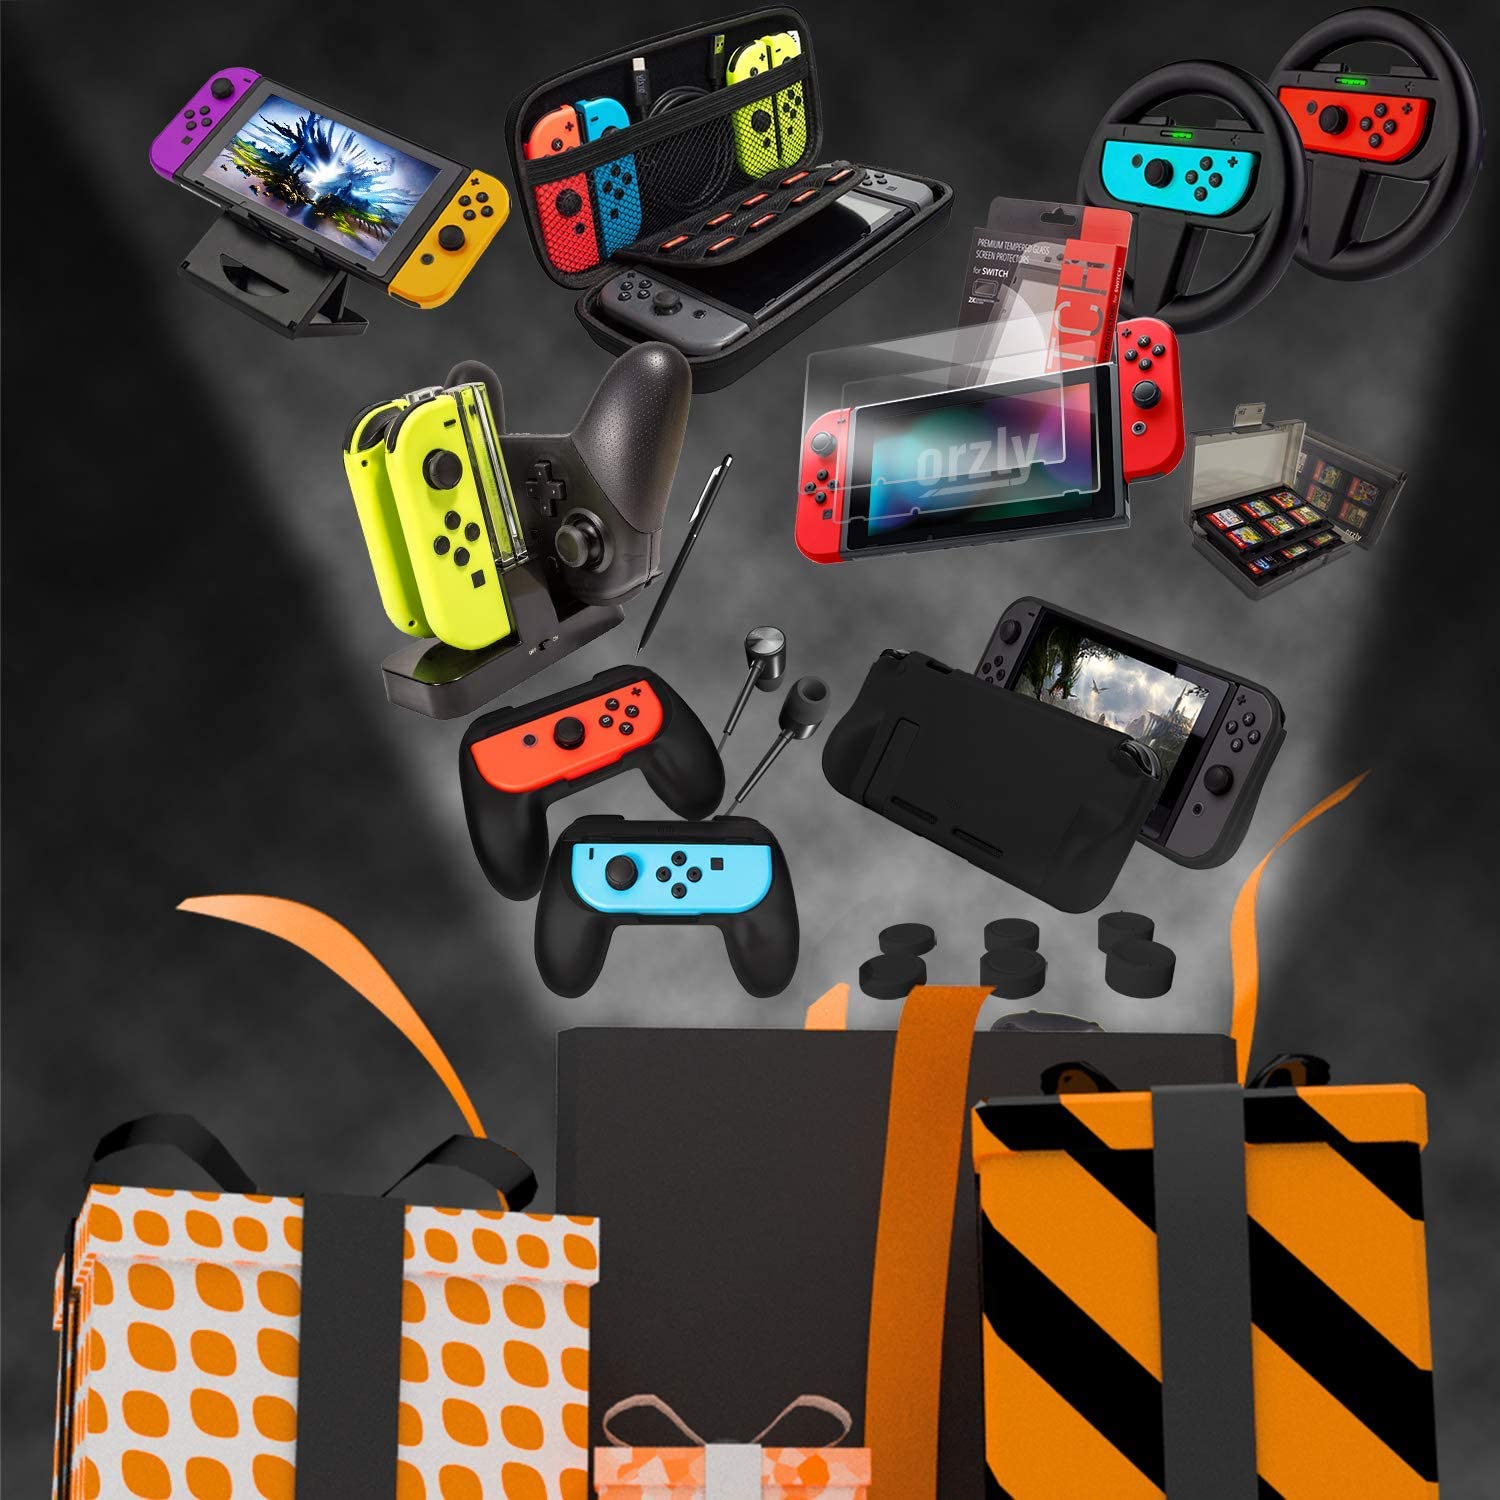 Orzly Accessories Bundle Compatible with Nintendo Switch